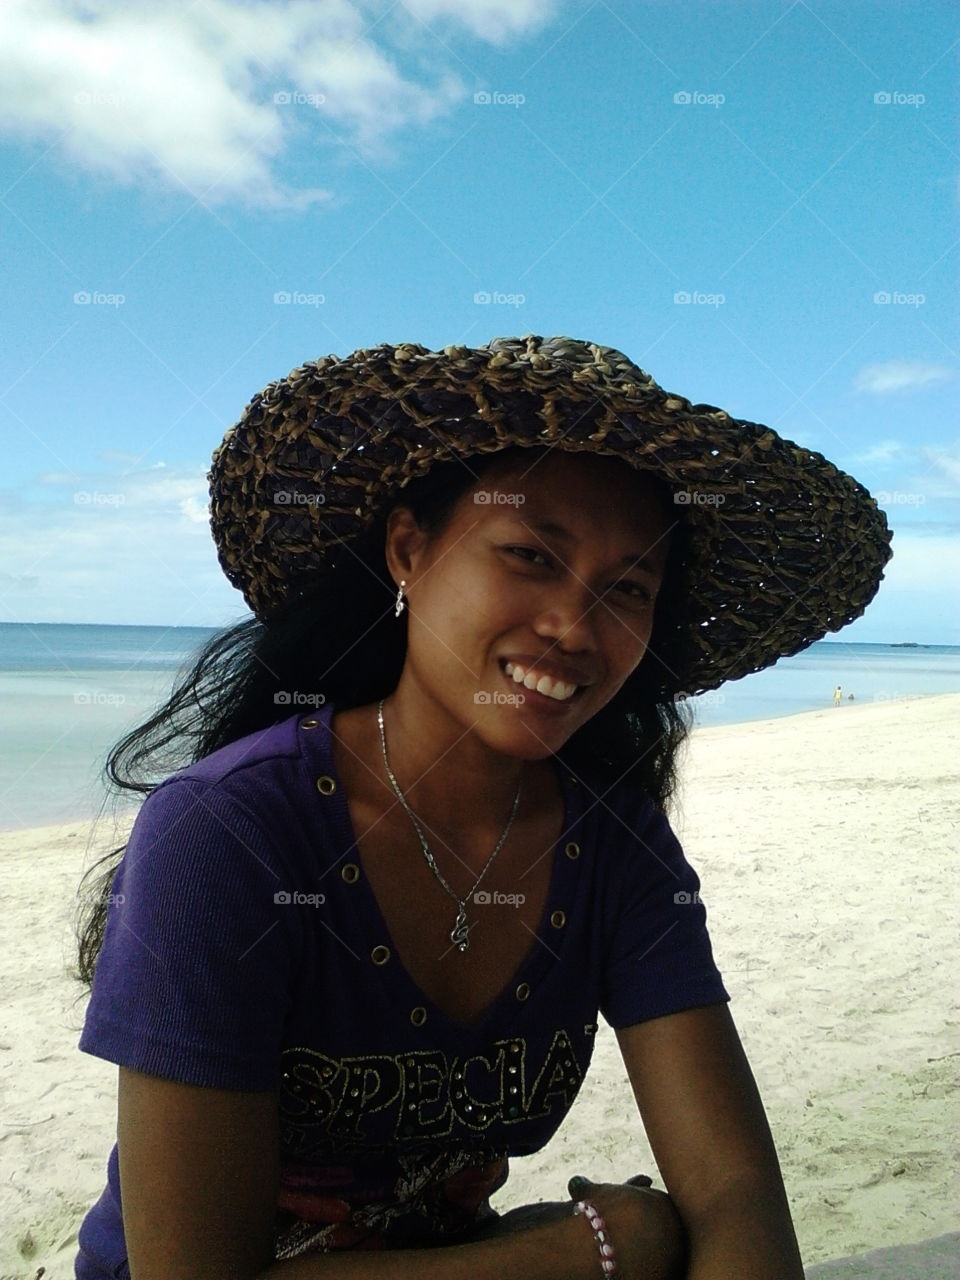 wearing a violet blouse and a native hat on the beach